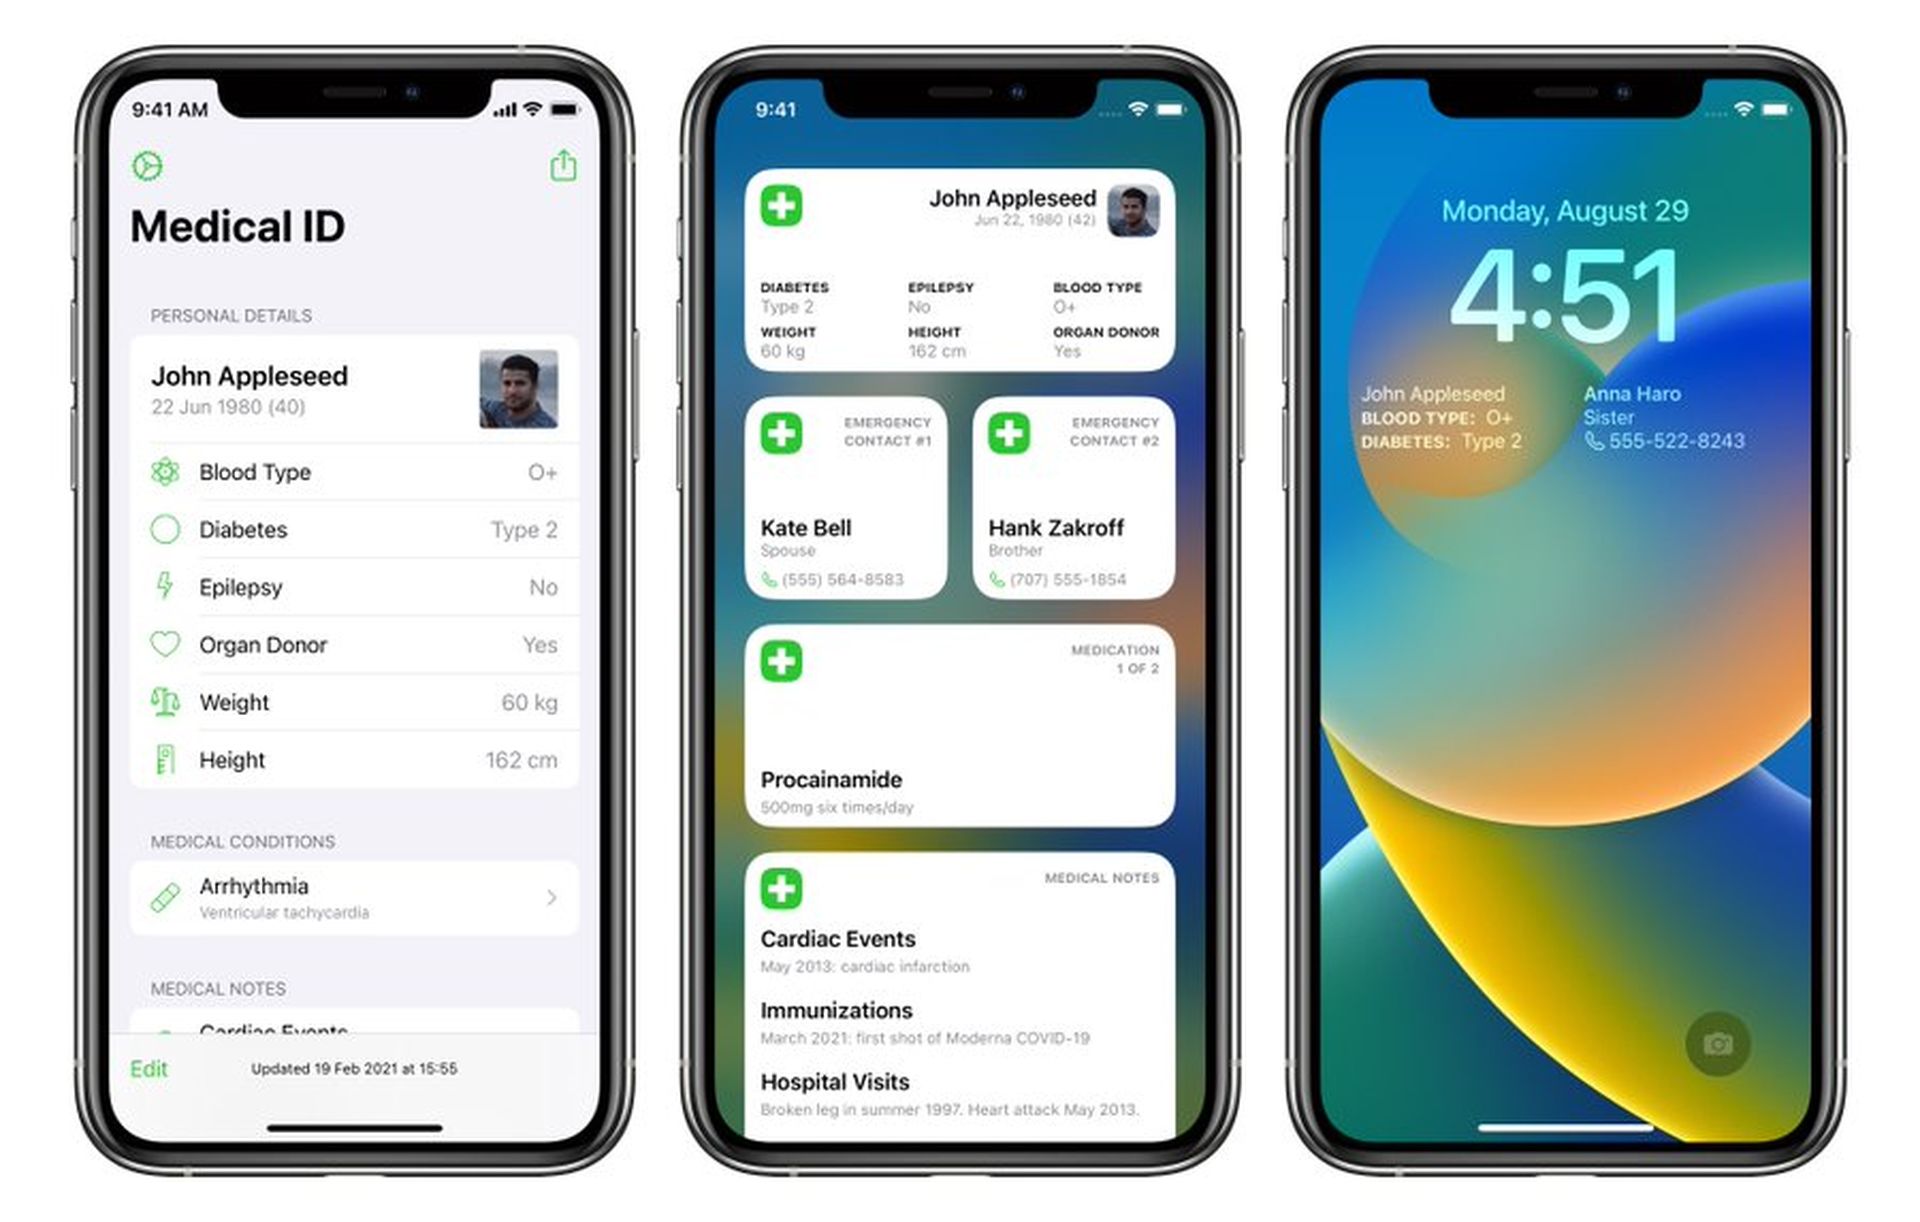 In this article, we are going to be covering the best iOS 16 lock screen widgets, so you can start using this great feature right away.